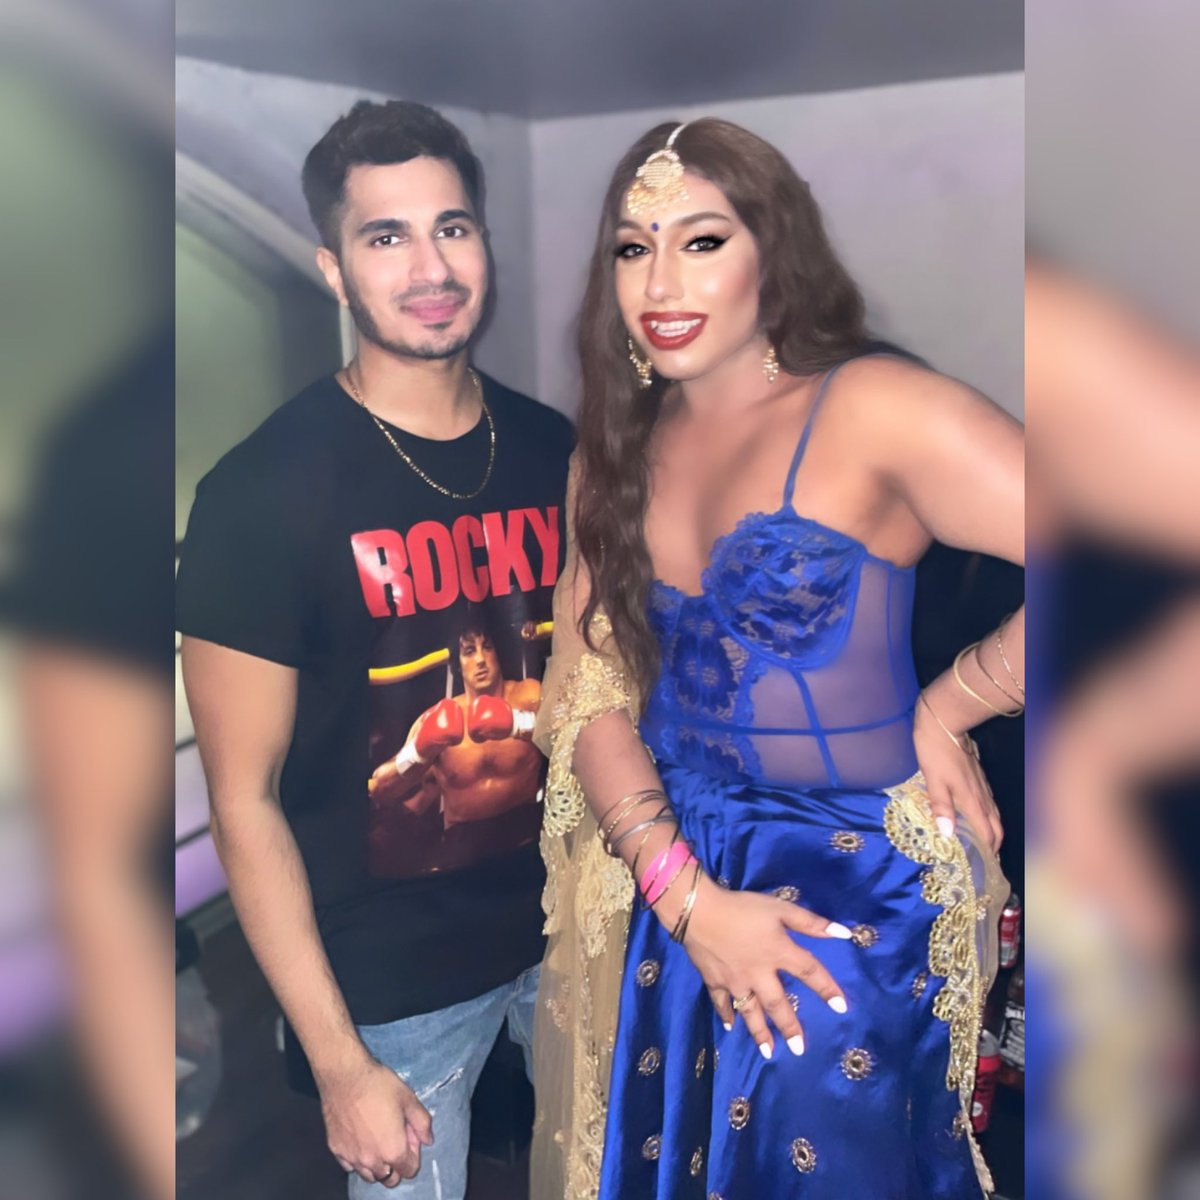 Lovely  meeting @ArjunArtist a man who’s broken heart may never heal but gives so much joy, happiness through music to us all. Keep #representing staying strong, she would be proud just like we all are 💋 #LuckyRoySingh #dragraceuk #dragperformer #qpoc #indiandragqueen #lgbtq